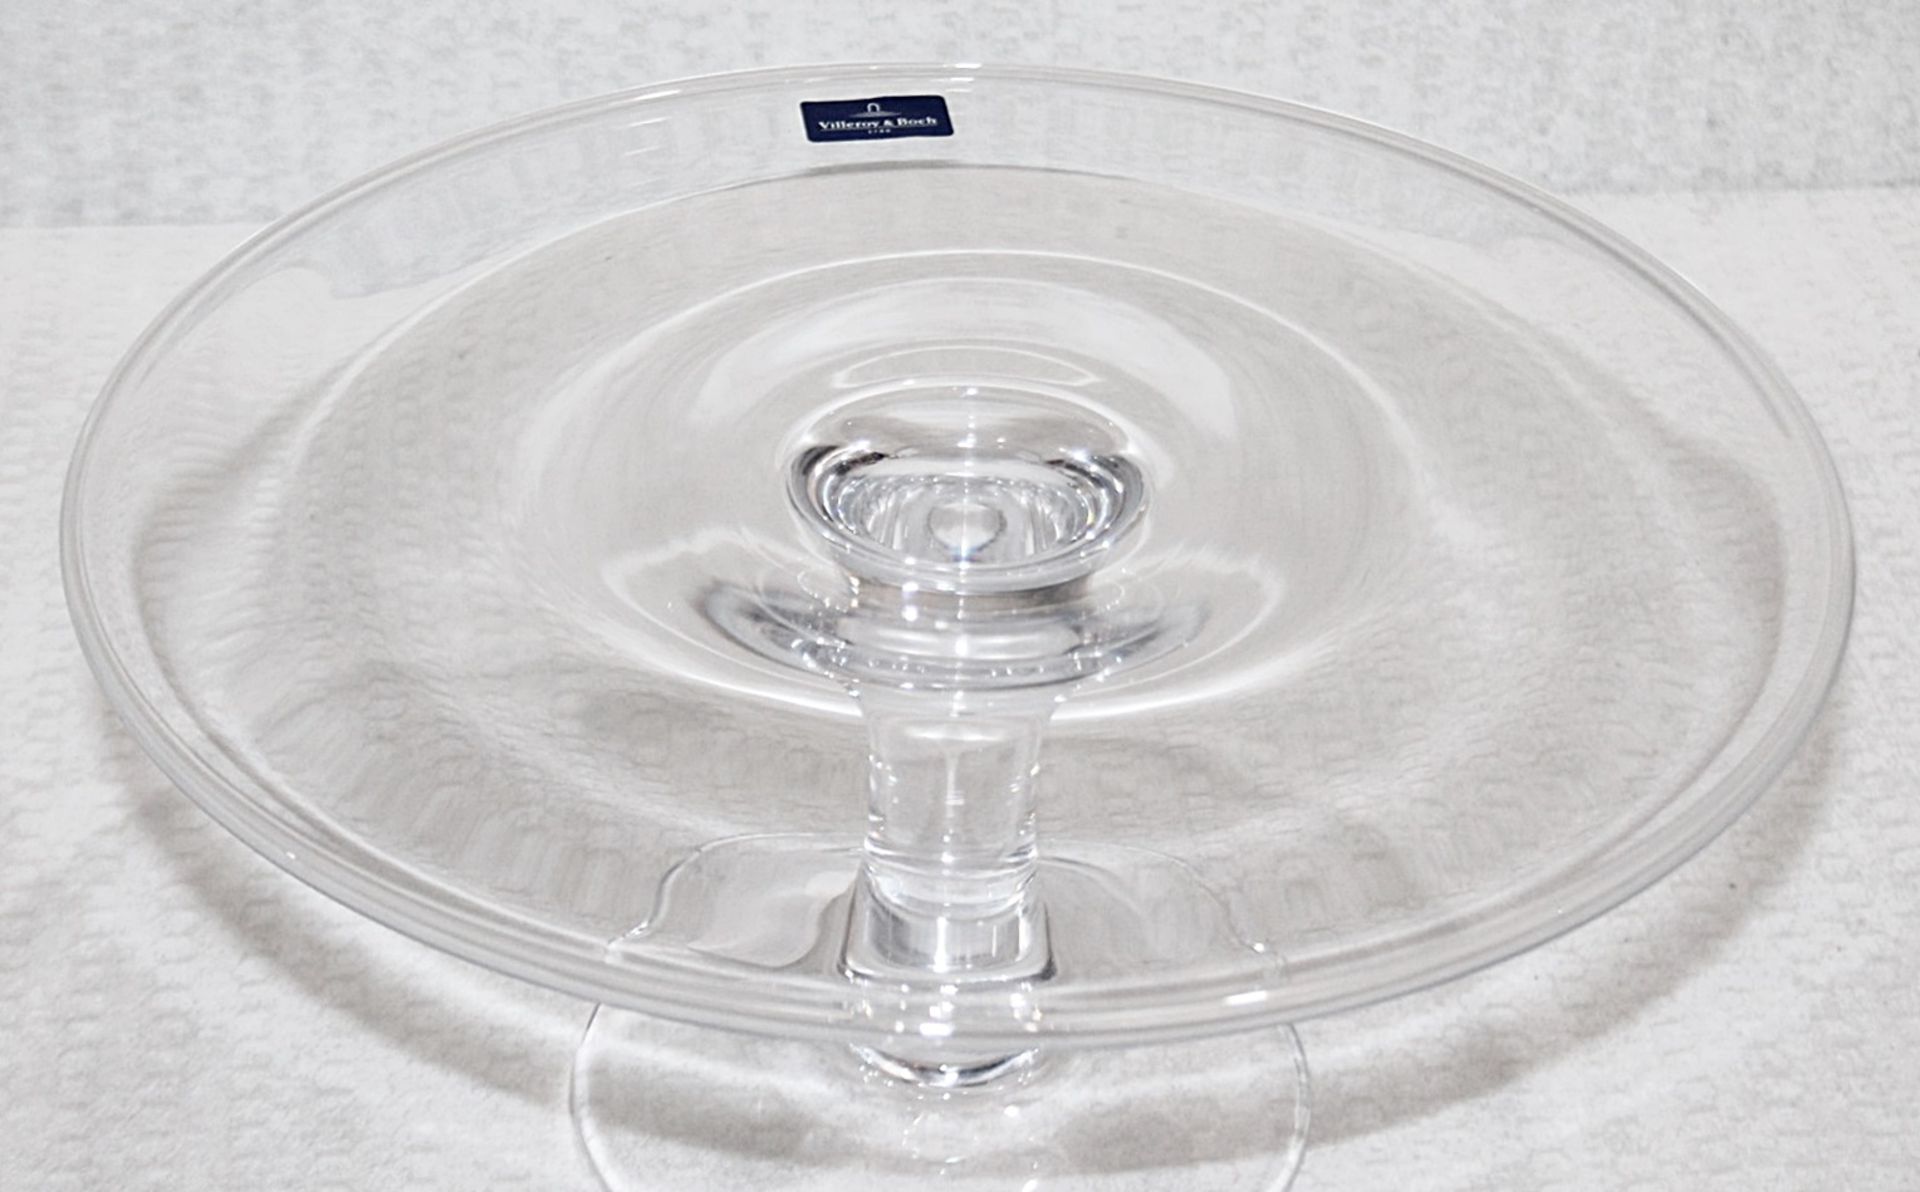 1 x VILLEROY & BOCH 'Retro Accessoires' Crystal Glass Serving Plate / Cake Stand - Image 4 of 6